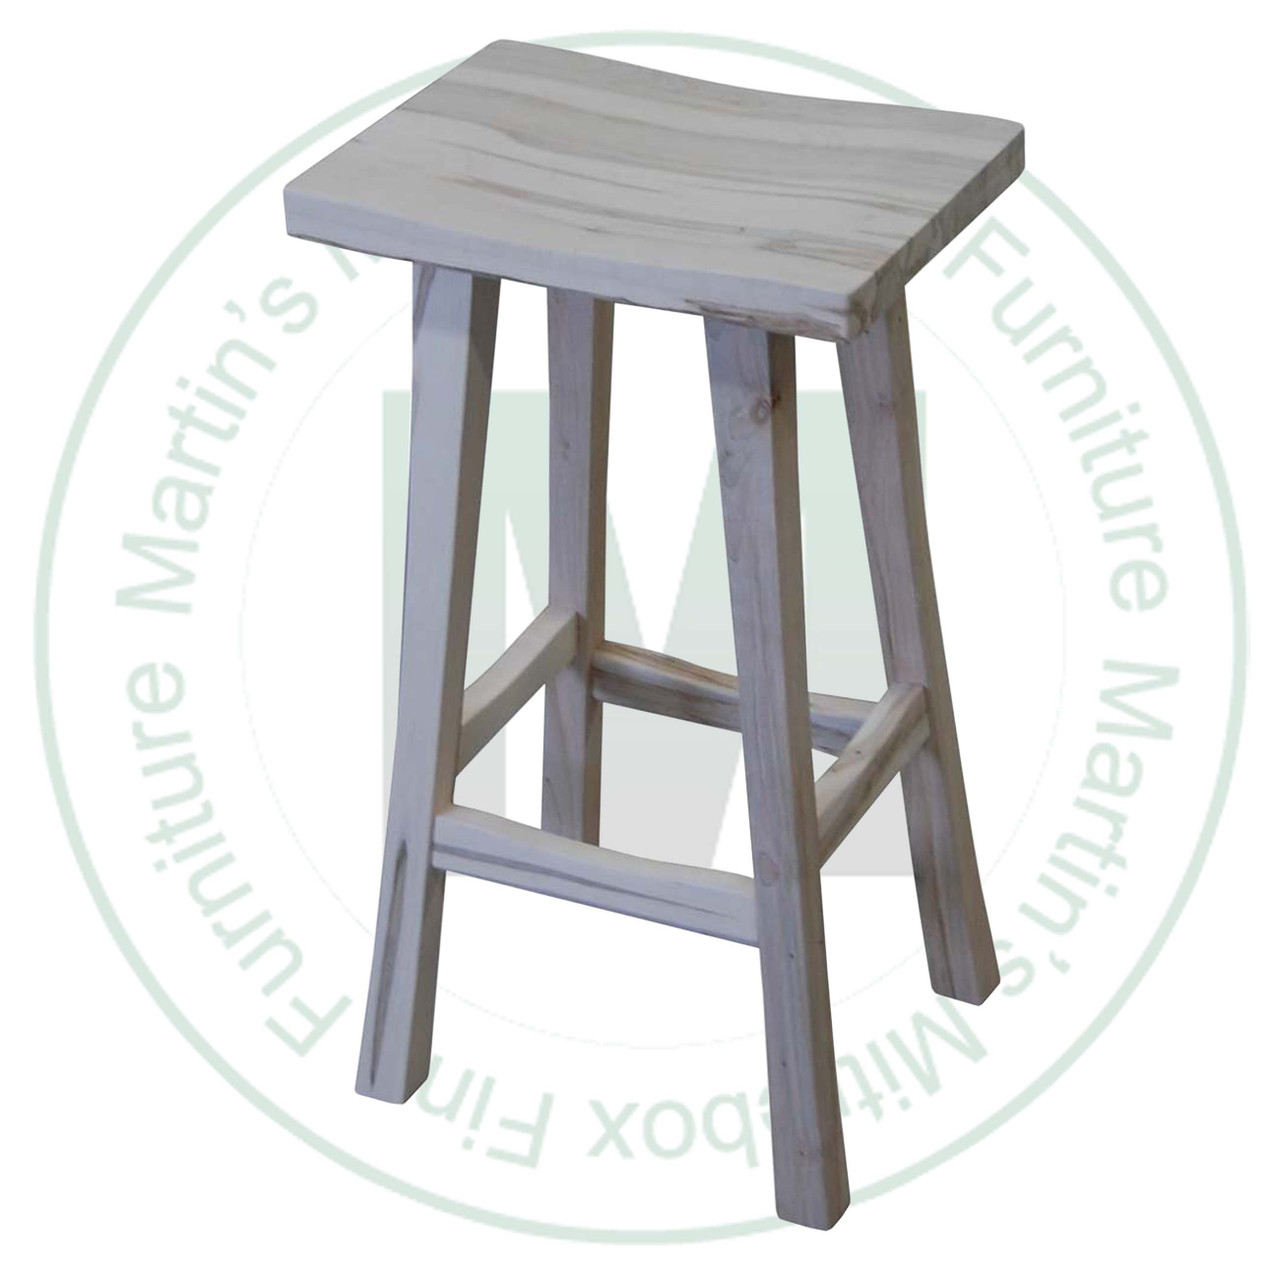 Wormy Maple Mission Saddle 24" Stool With Wood Seat